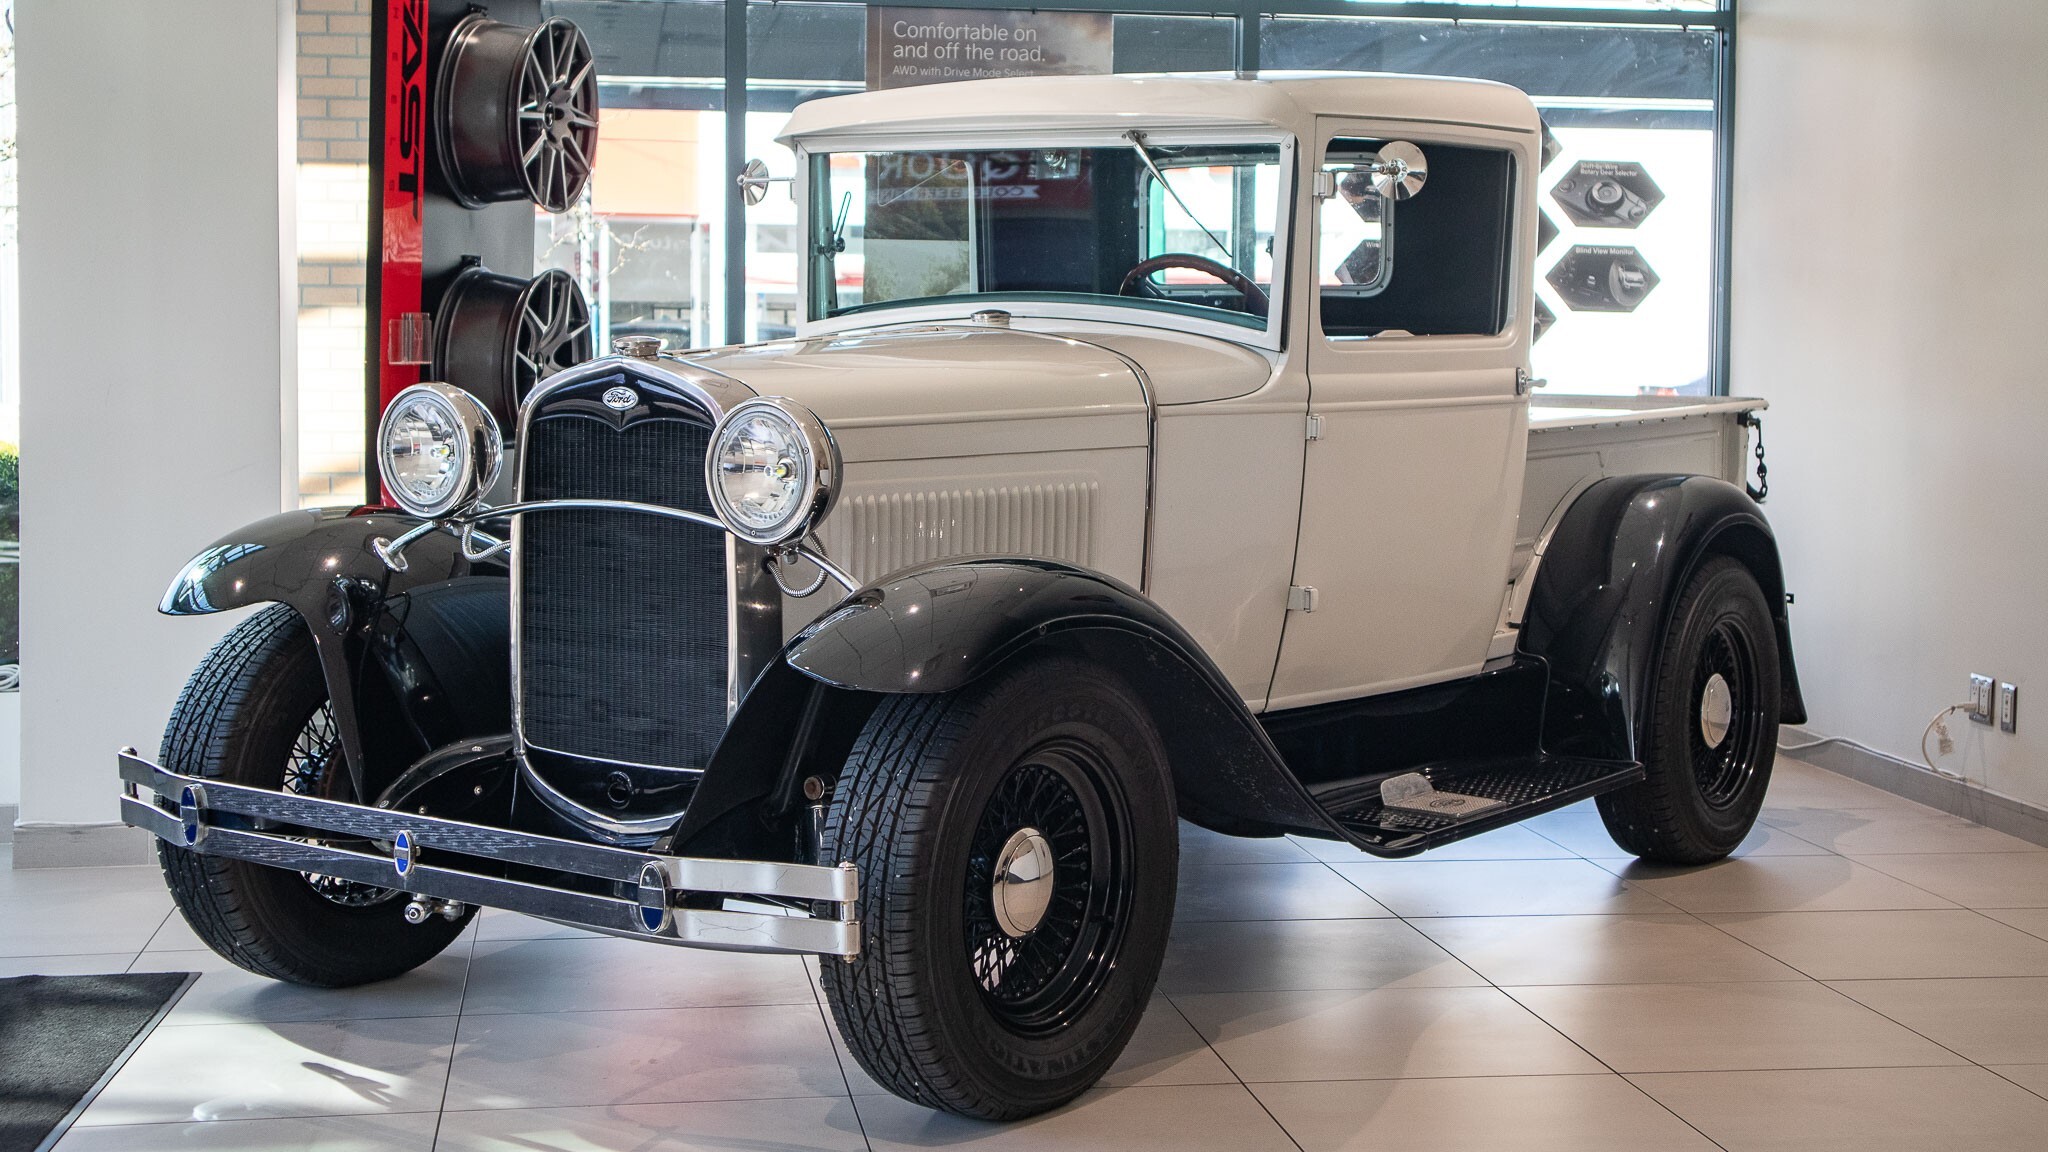 1931 Ford Model A | EV CONVERTED | 17.6 kWh LITHIUM B.| LED LIGHTS |